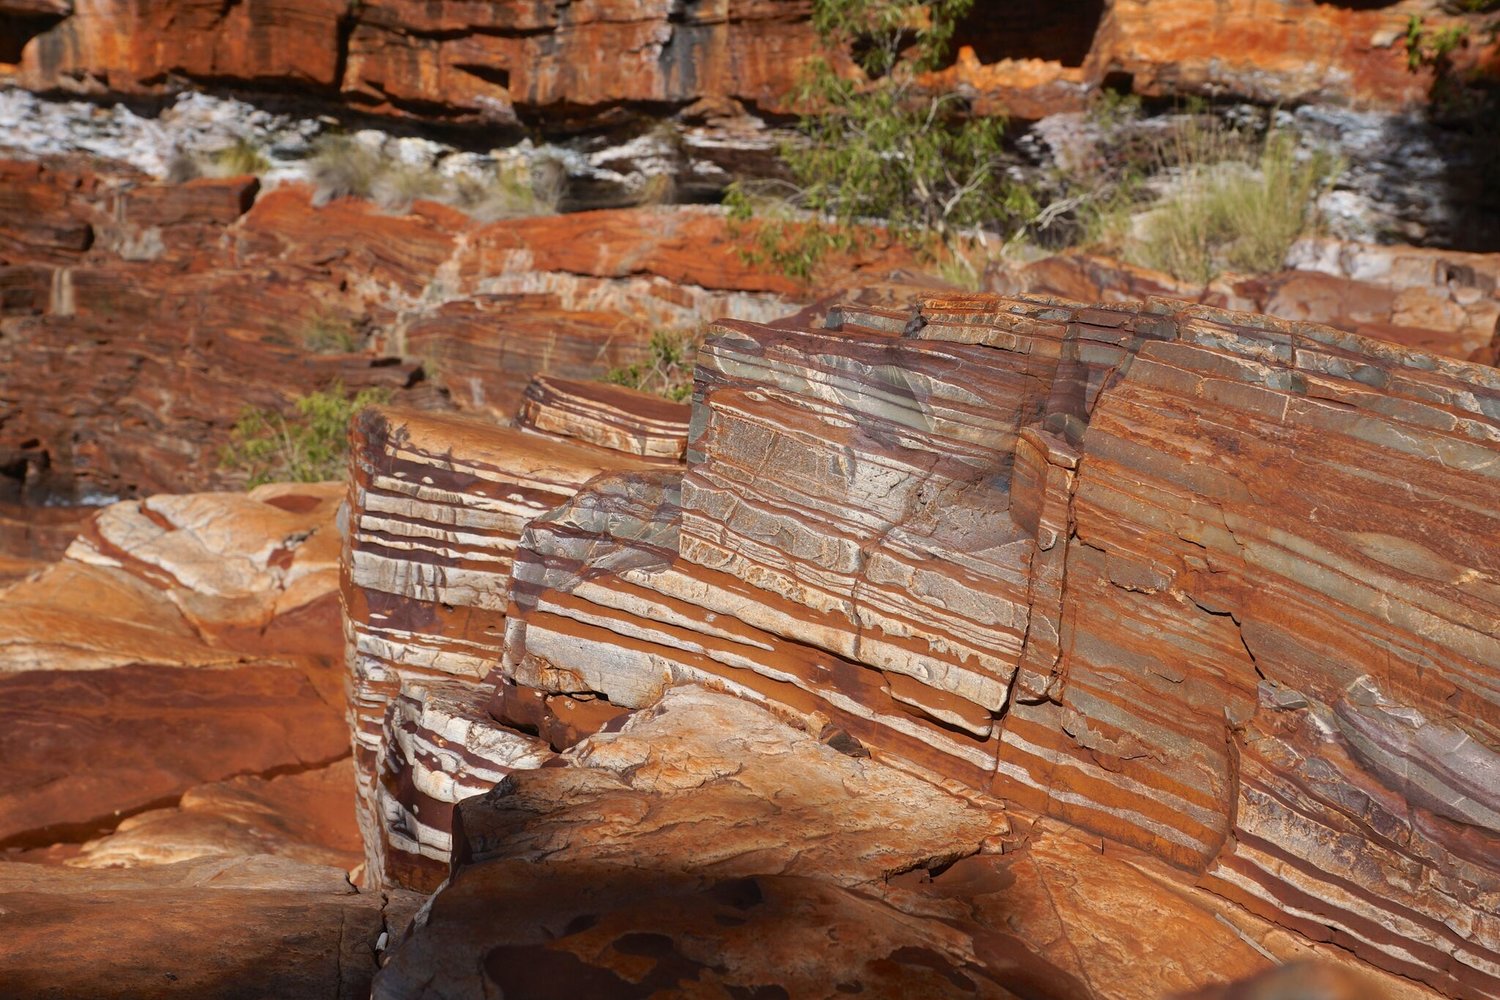 Banded Iron Formations hold clues to the earliest rise of oxygen on Earth